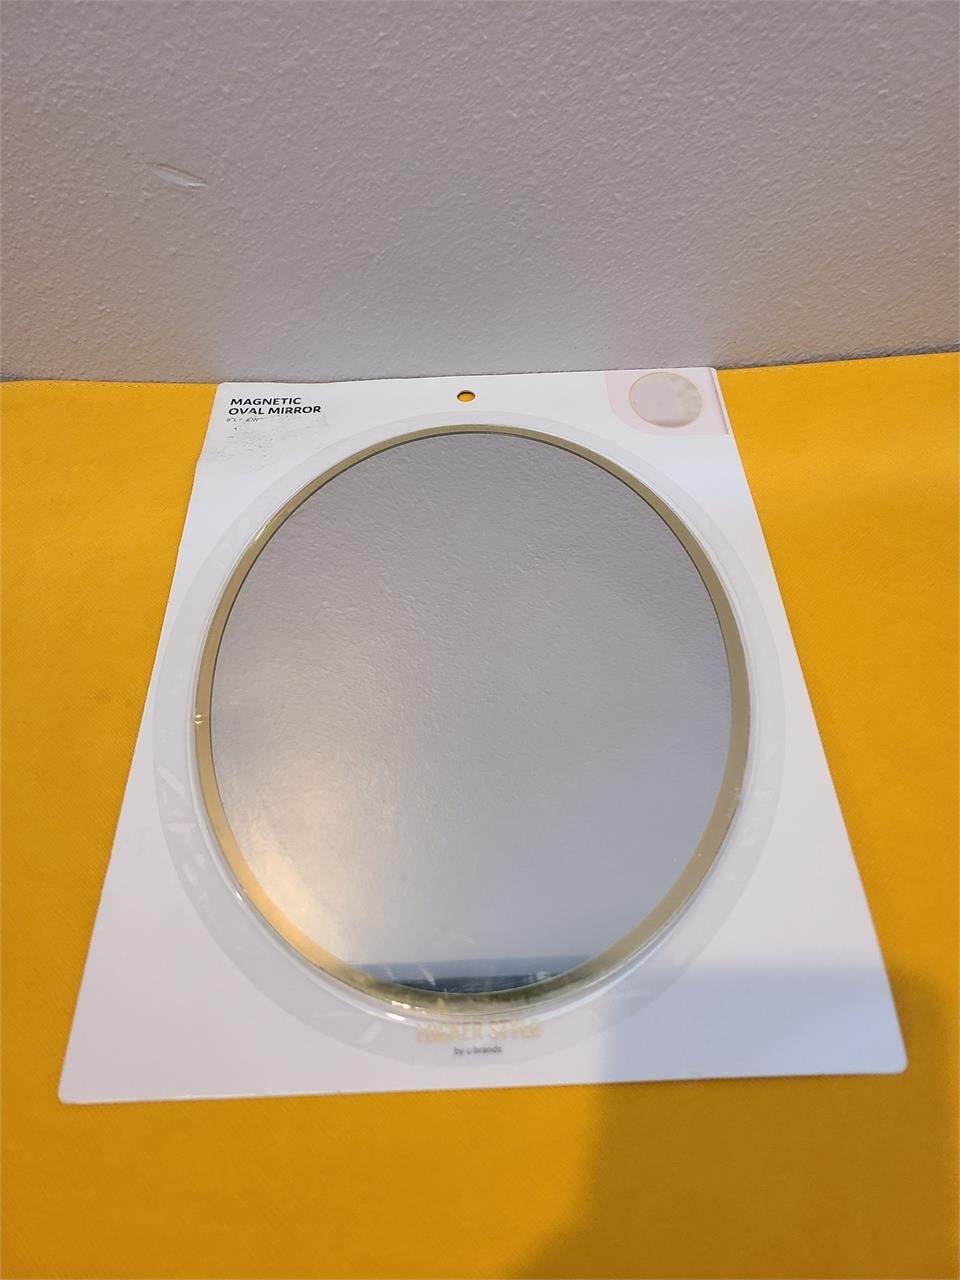 Magnetic oval mirror